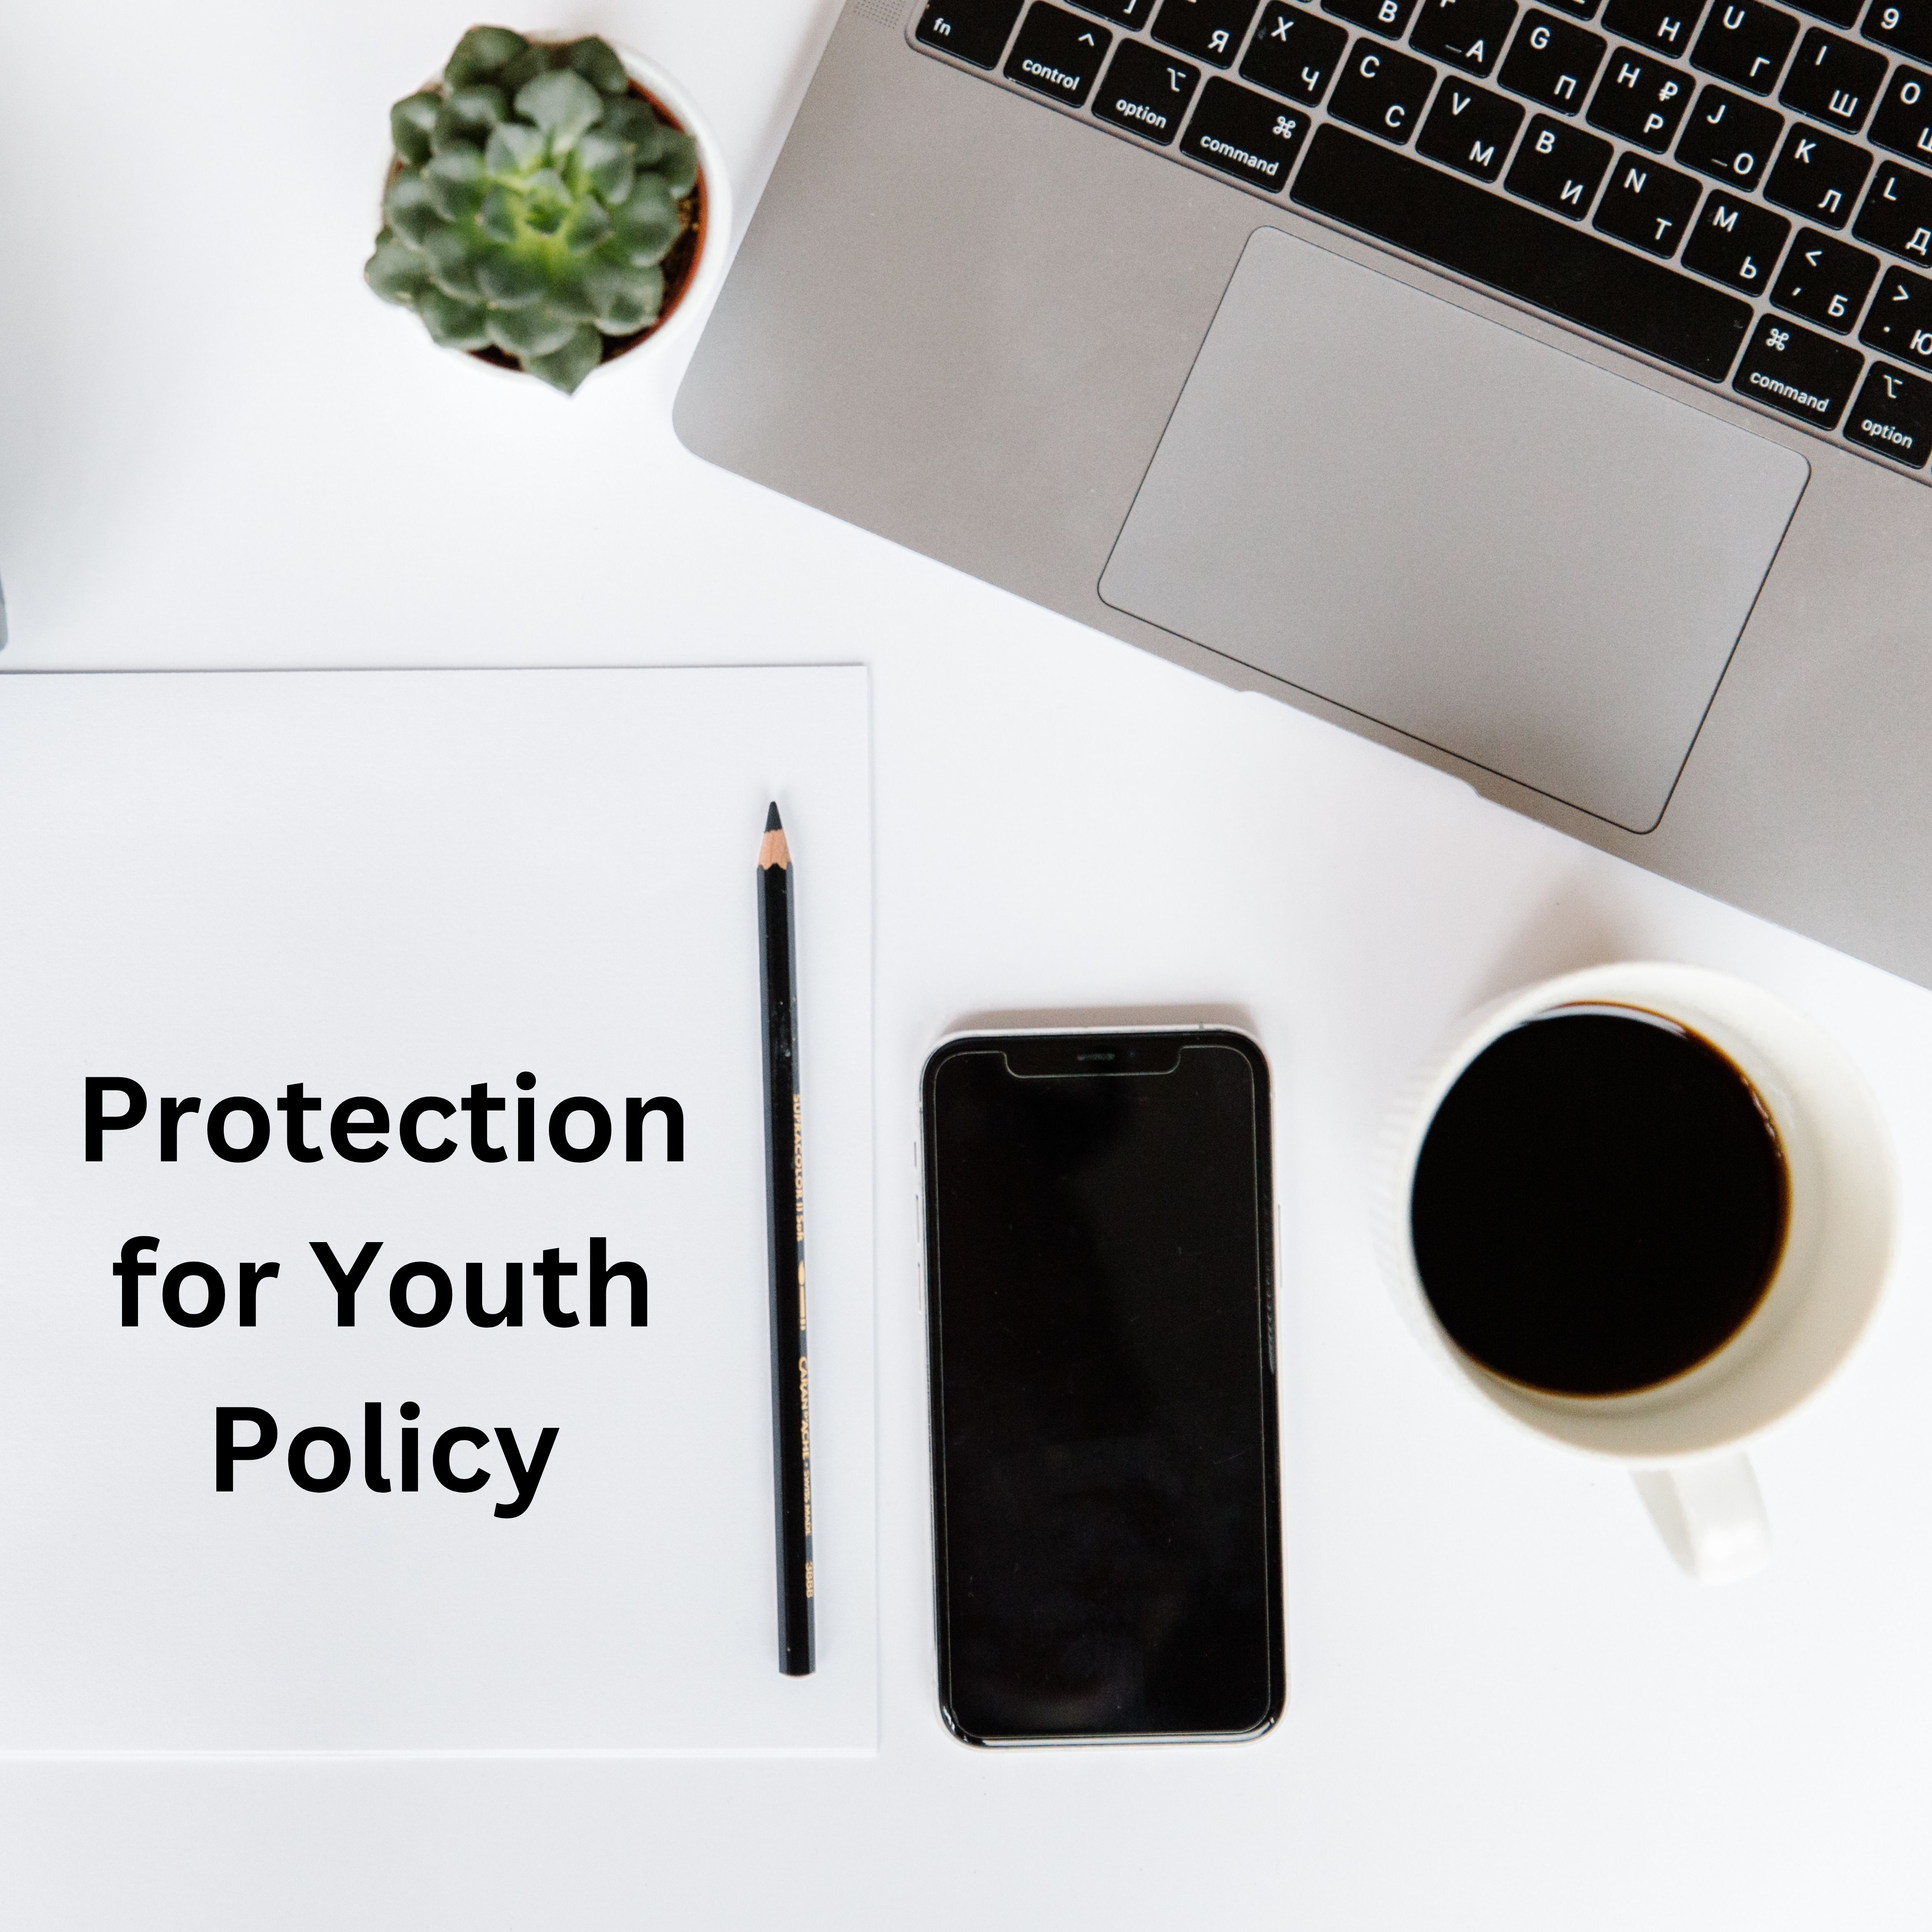 Policies for the Protection of Youth